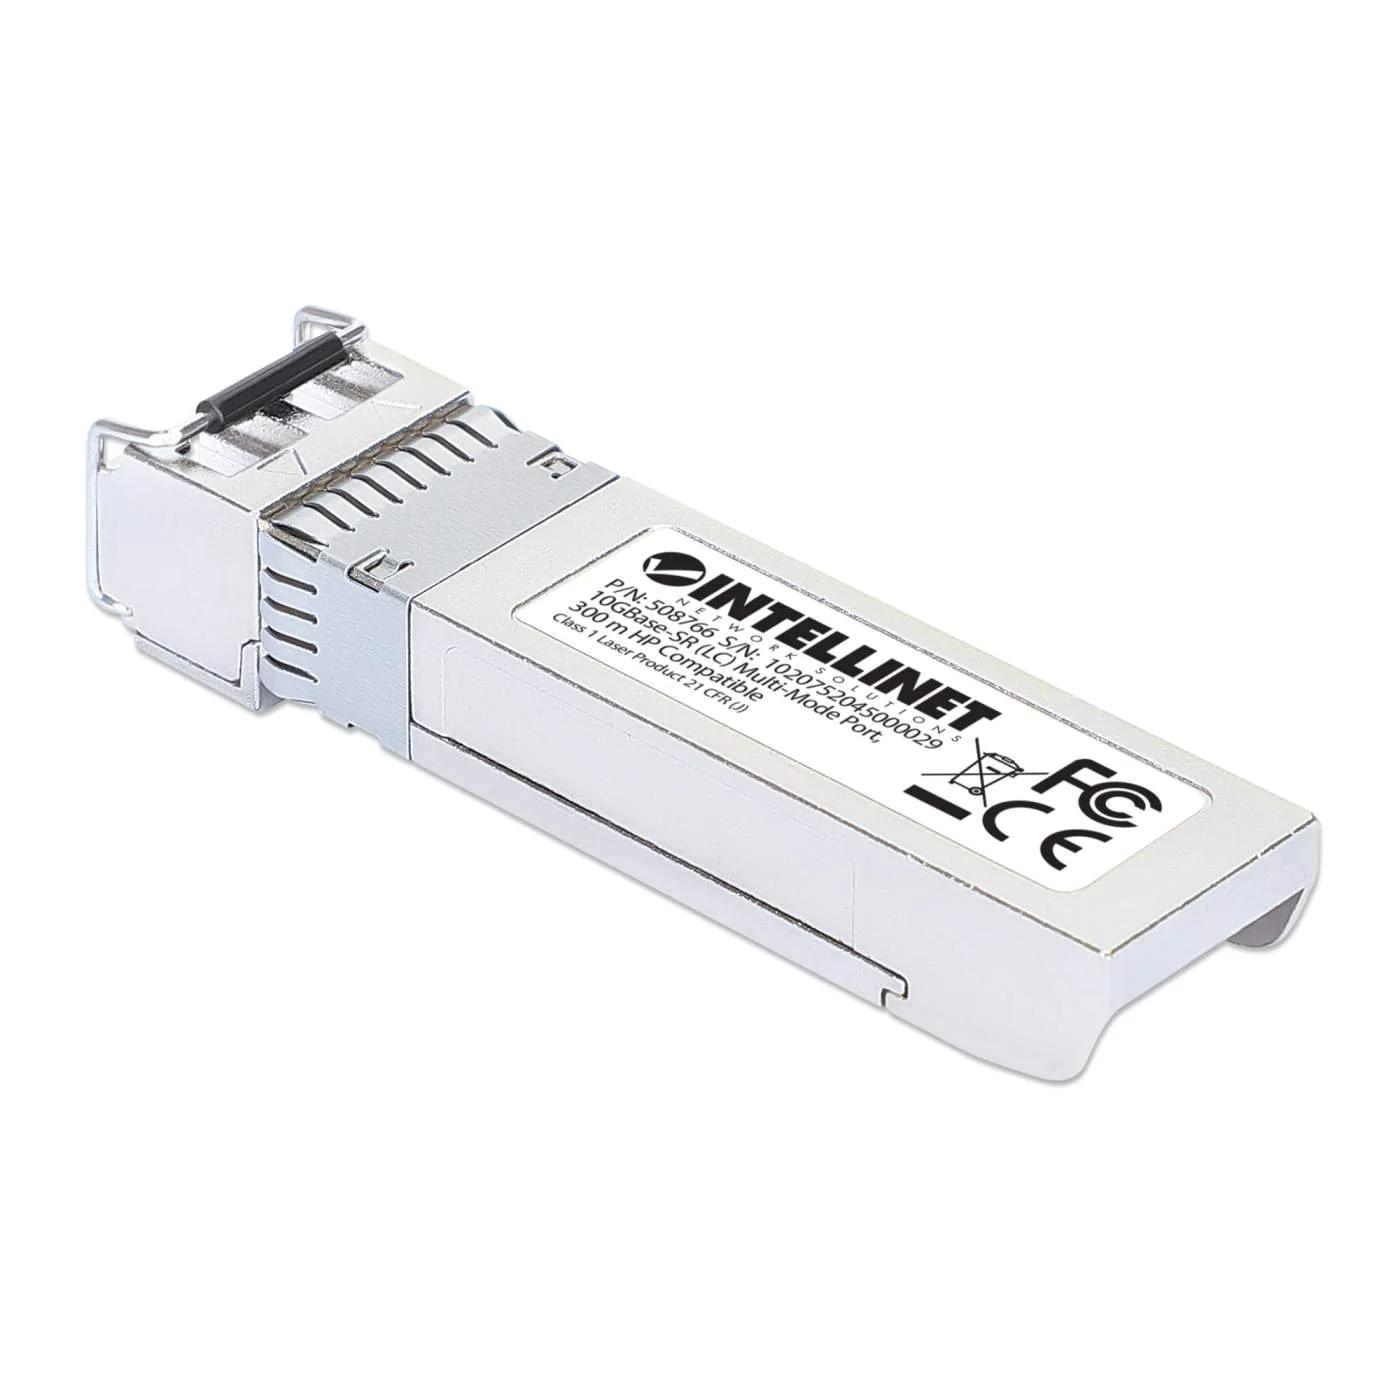 hewlett packard hp procurve 10-gbe sfp+ sr transceiver - What is the difference between SFP-10G-SR and SFP-10G-SR S